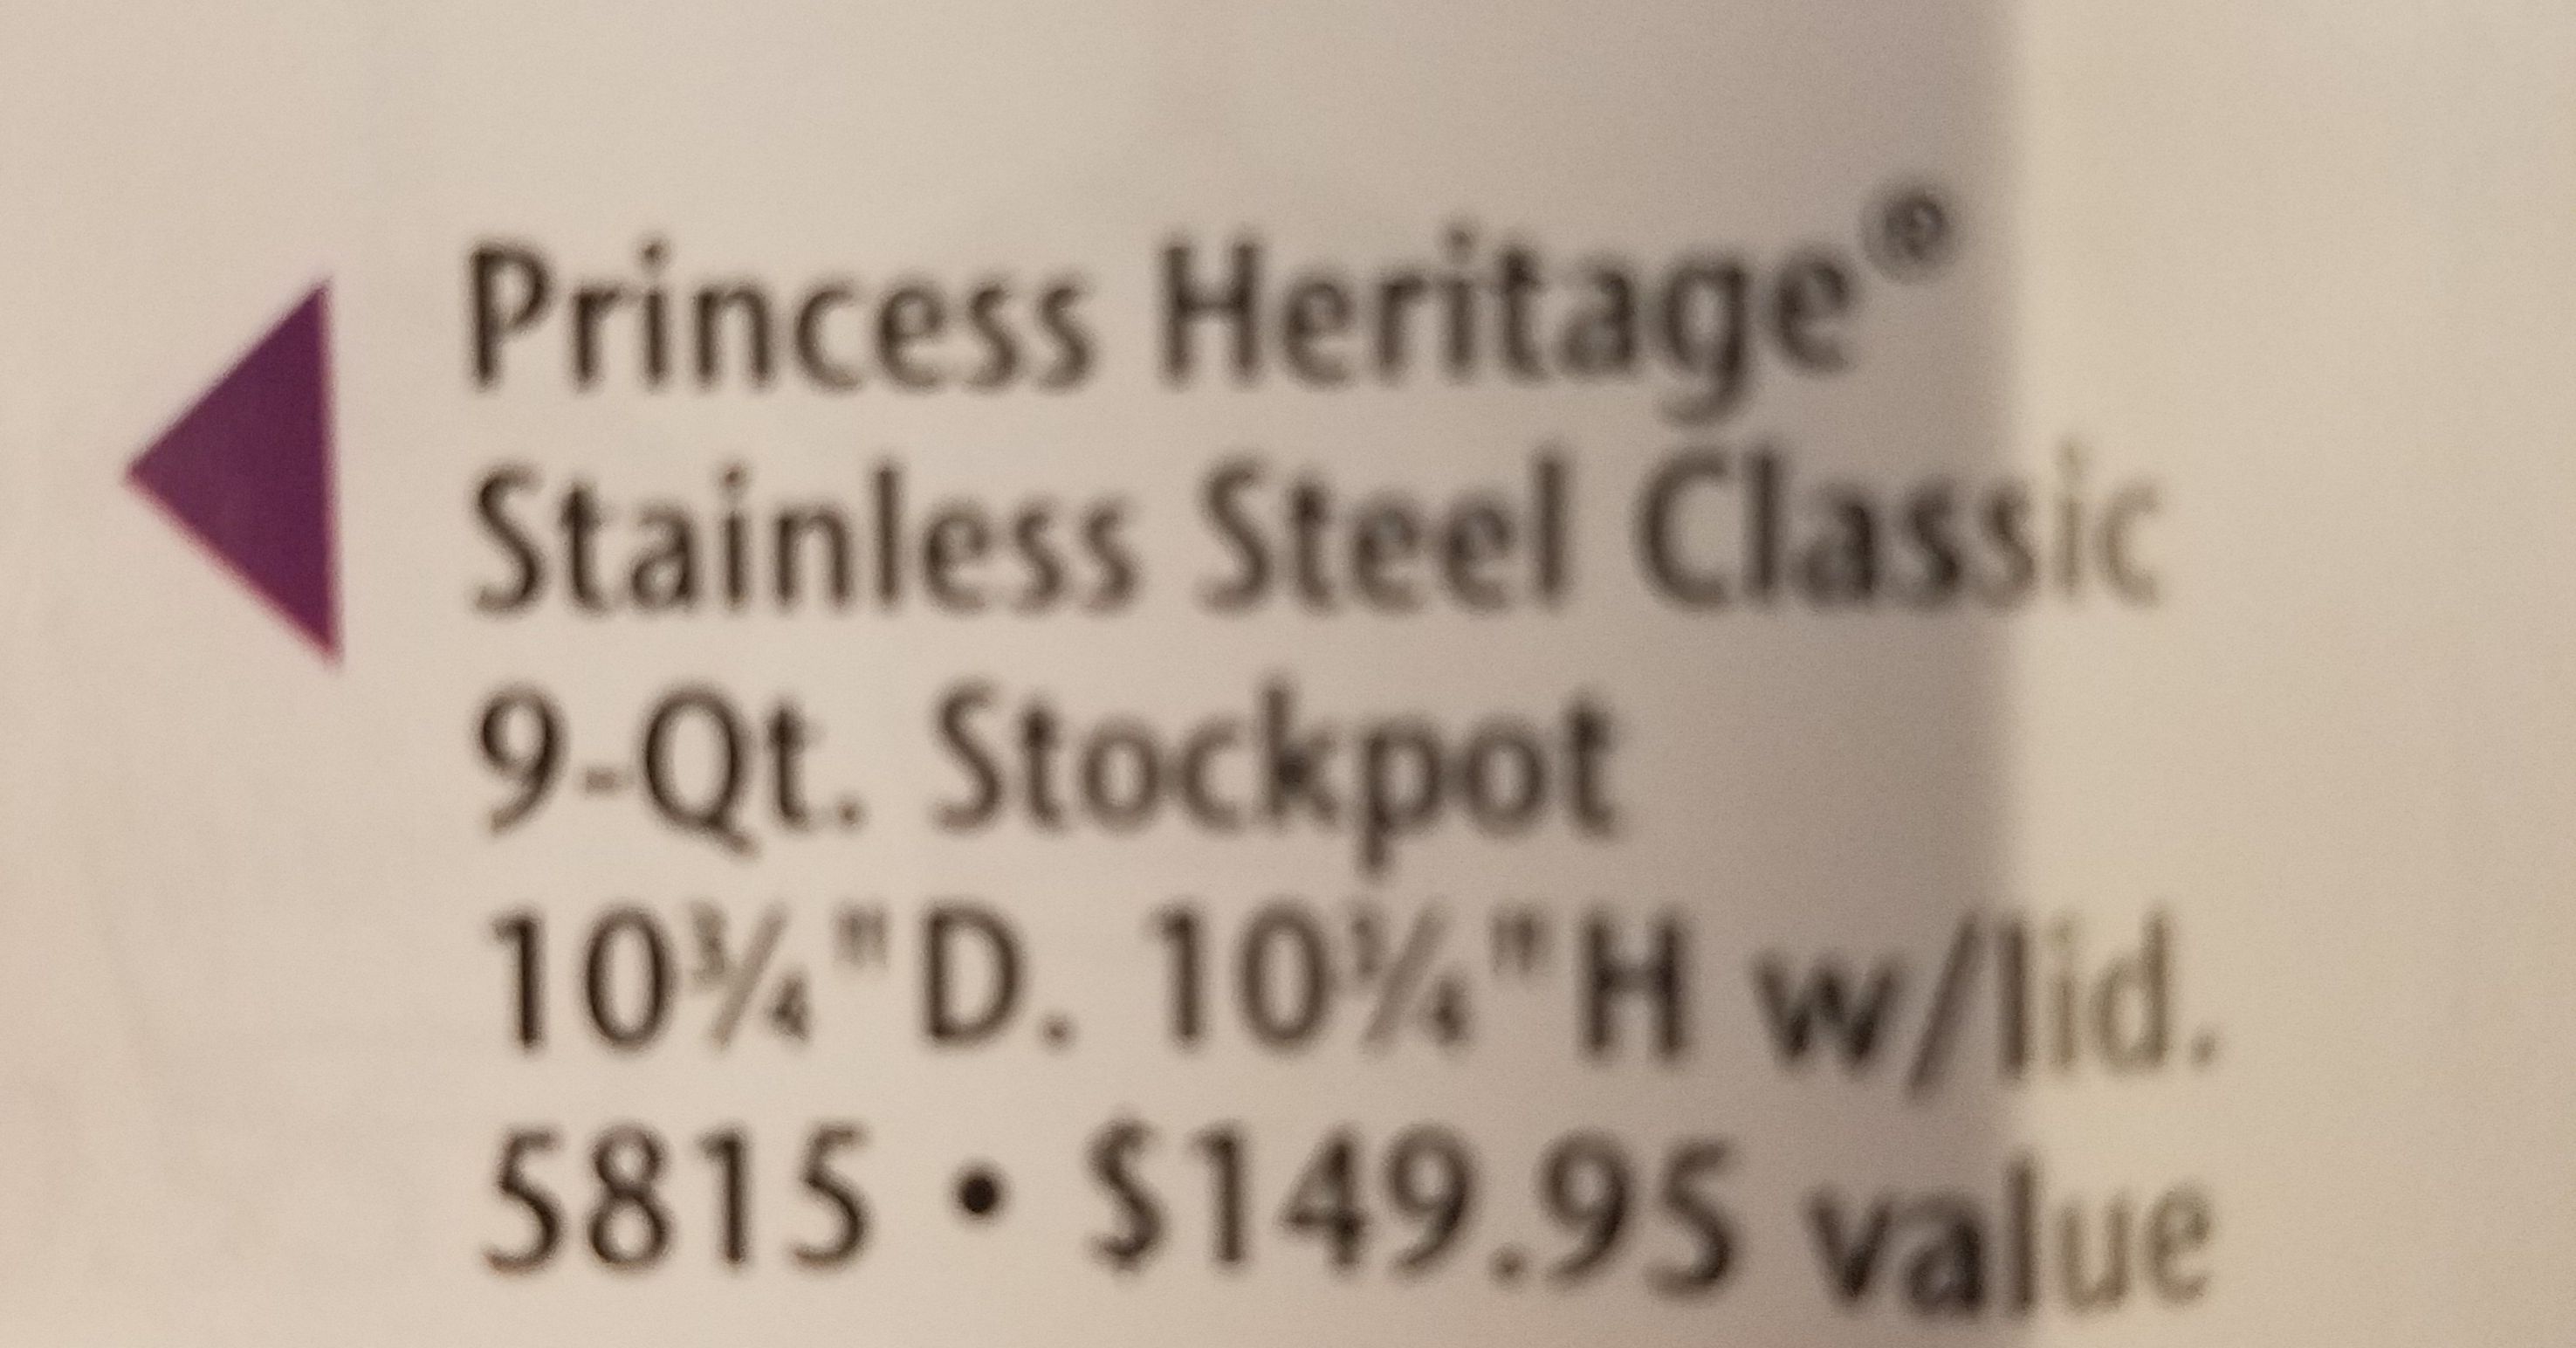 Princess House 9 Qt Stock Pot # 5815 Classic Stainless Steel Heritage New